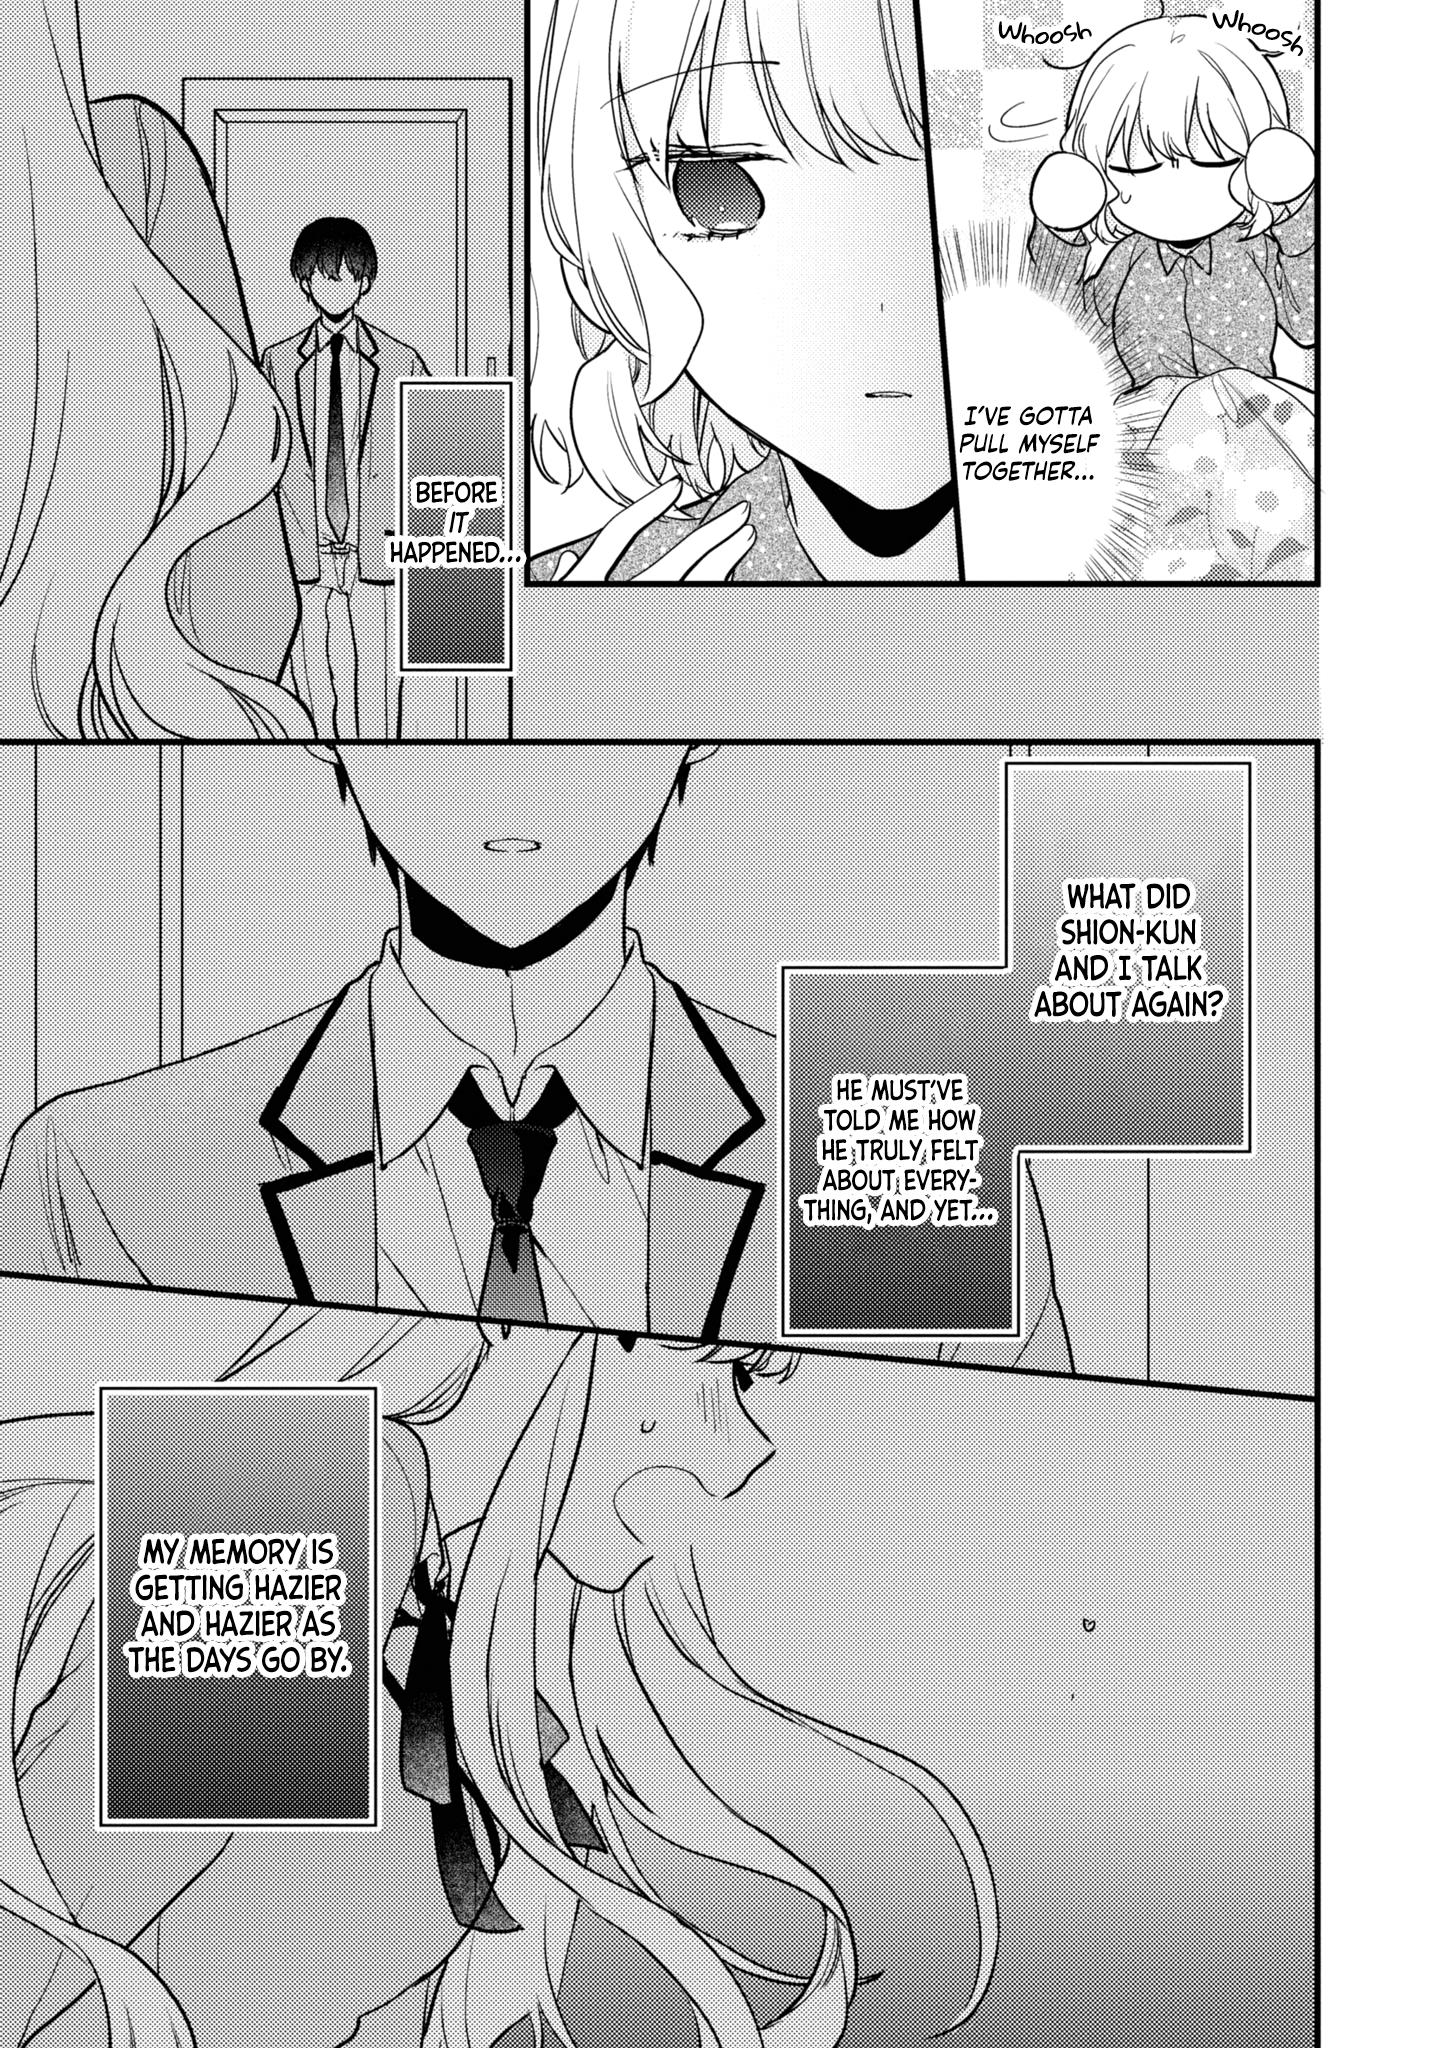 I Have A Second Chance At Life, So I’Ll Pamper My Yandere Boyfriend For A Happy Ending!! Chapter 5 #4